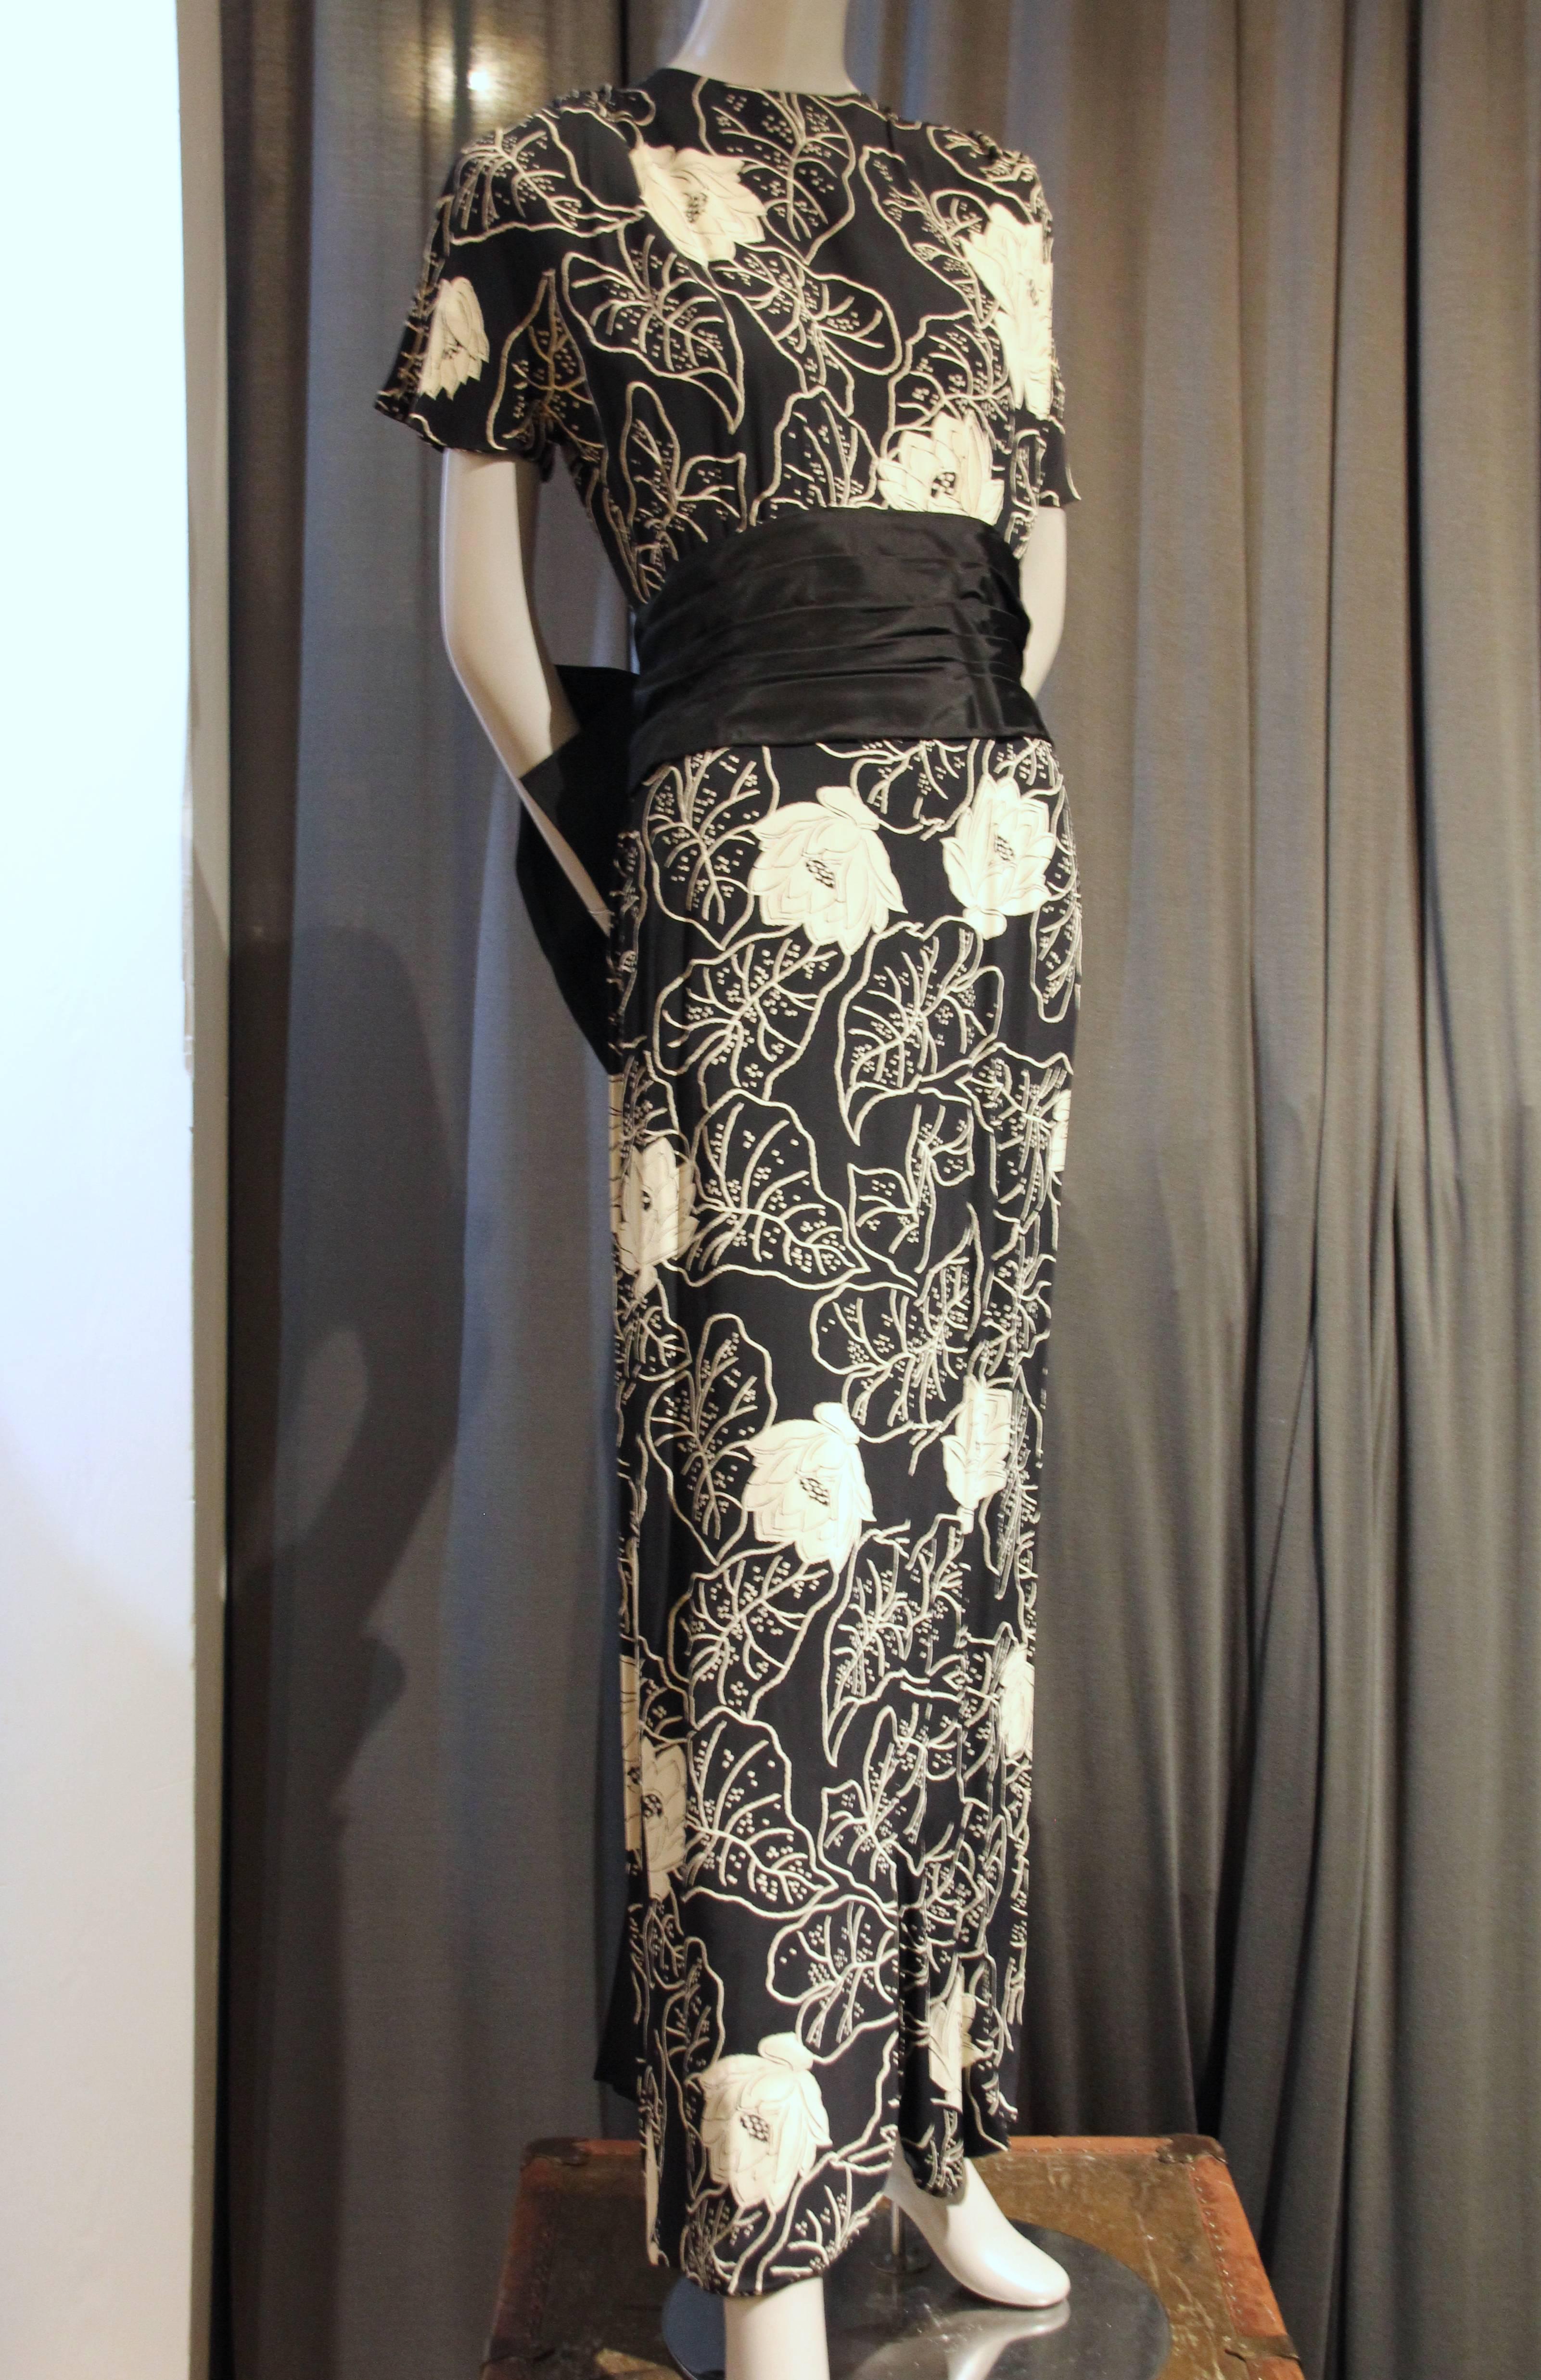 A beautiful 1940s Eisenberg Original black and white floral print gown in flowing rayon:  Classic 1940s styling with shoulder pads, simple rounded collar, draped bodice and fitted hip.  A neat column silhouette is adored with a black silk taffeta